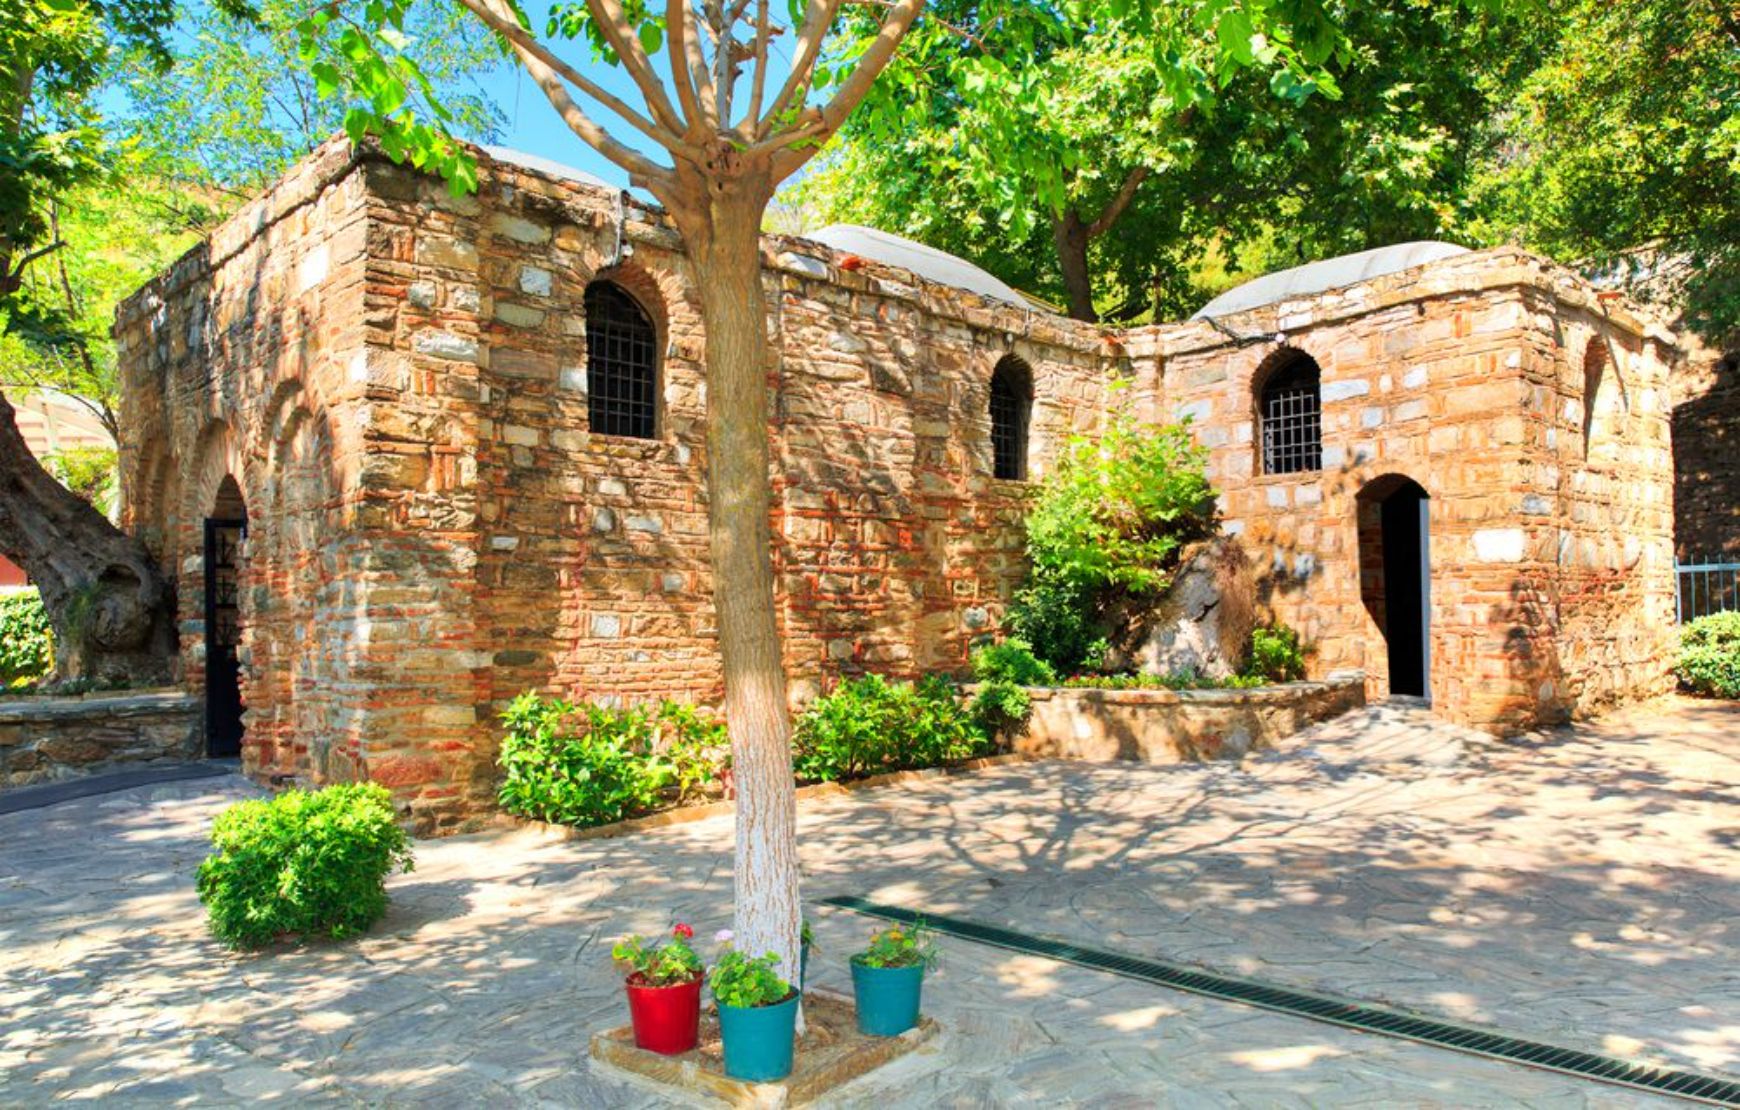 Visit House of Virgin Mary with our Ephesus Tour from Kusadasi Cruise Port